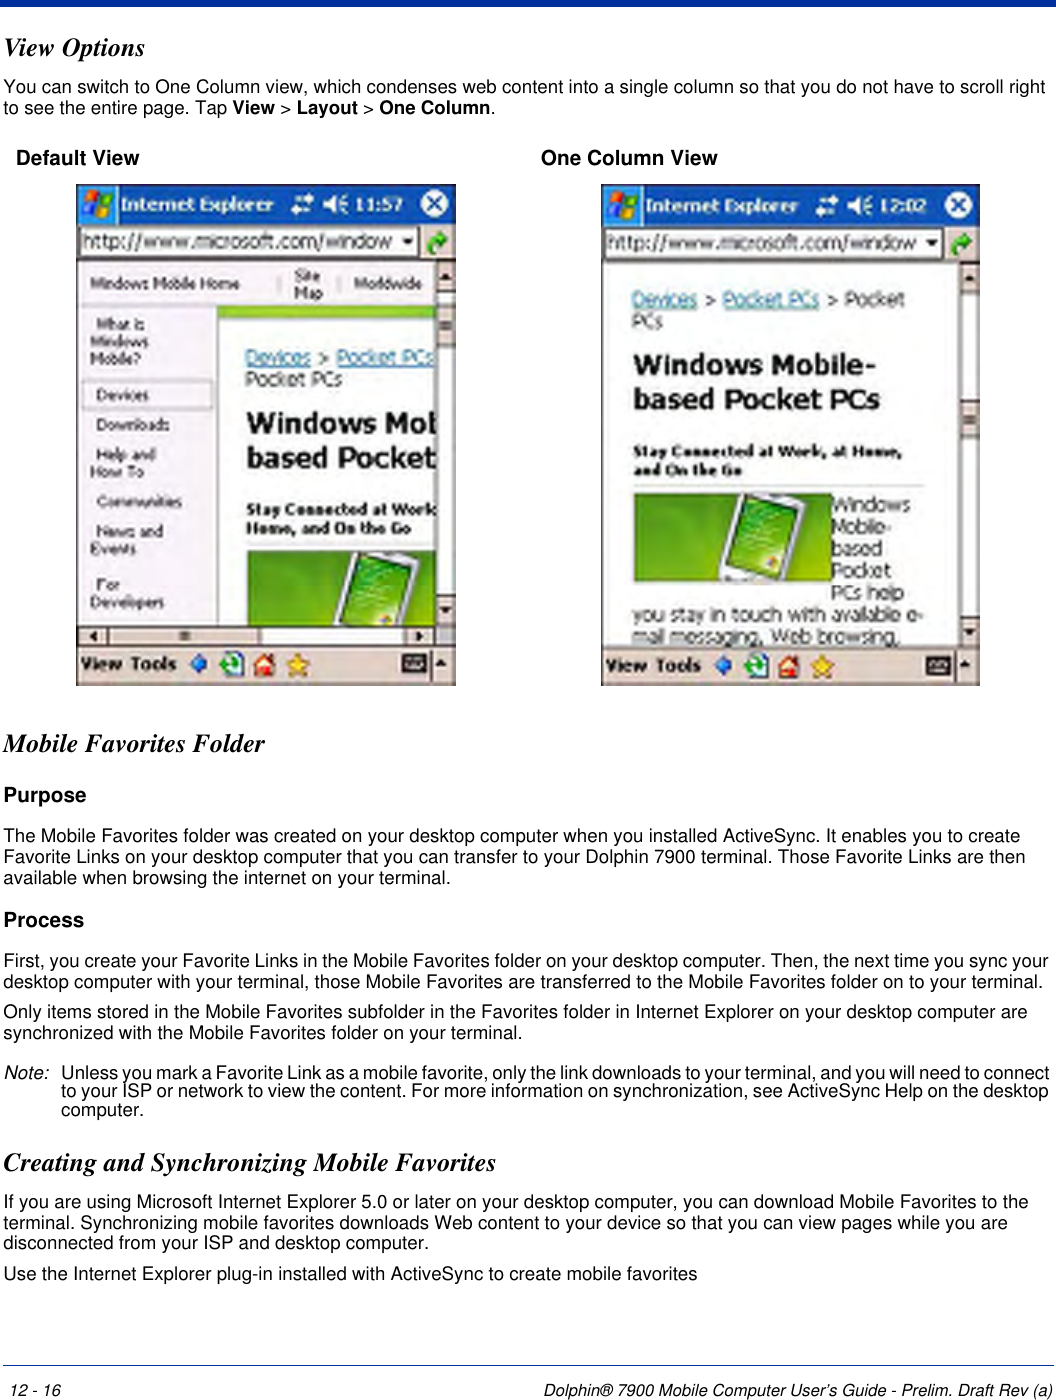 12 - 16 Dolphin® 7900 Mobile Computer User’s Guide - Prelim. Draft Rev (a)View OptionsYou can switch to One Column view, which condenses web content into a single column so that you do not have to scroll right to see the entire page. Tap View &gt; Layout &gt; One Column.Mobile Favorites FolderPurposeThe Mobile Favorites folder was created on your desktop computer when you installed ActiveSync. It enables you to create Favorite Links on your desktop computer that you can transfer to your Dolphin 7900 terminal. Those Favorite Links are then available when browsing the internet on your terminal. ProcessFirst, you create your Favorite Links in the Mobile Favorites folder on your desktop computer. Then, the next time you sync your desktop computer with your terminal, those Mobile Favorites are transferred to the Mobile Favorites folder on to your terminal. Only items stored in the Mobile Favorites subfolder in the Favorites folder in Internet Explorer on your desktop computer are synchronized with the Mobile Favorites folder on your terminal. Note: Unless you mark a Favorite Link as a mobile favorite, only the link downloads to your terminal, and you will need to connect to your ISP or network to view the content. For more information on synchronization, see ActiveSync Help on the desktop computer.Creating and Synchronizing Mobile Favorites If you are using Microsoft Internet Explorer 5.0 or later on your desktop computer, you can download Mobile Favorites to the terminal. Synchronizing mobile favorites downloads Web content to your device so that you can view pages while you are disconnected from your ISP and desktop computer.Use the Internet Explorer plug-in installed with ActiveSync to create mobile favoritesDefault View  One Column View 